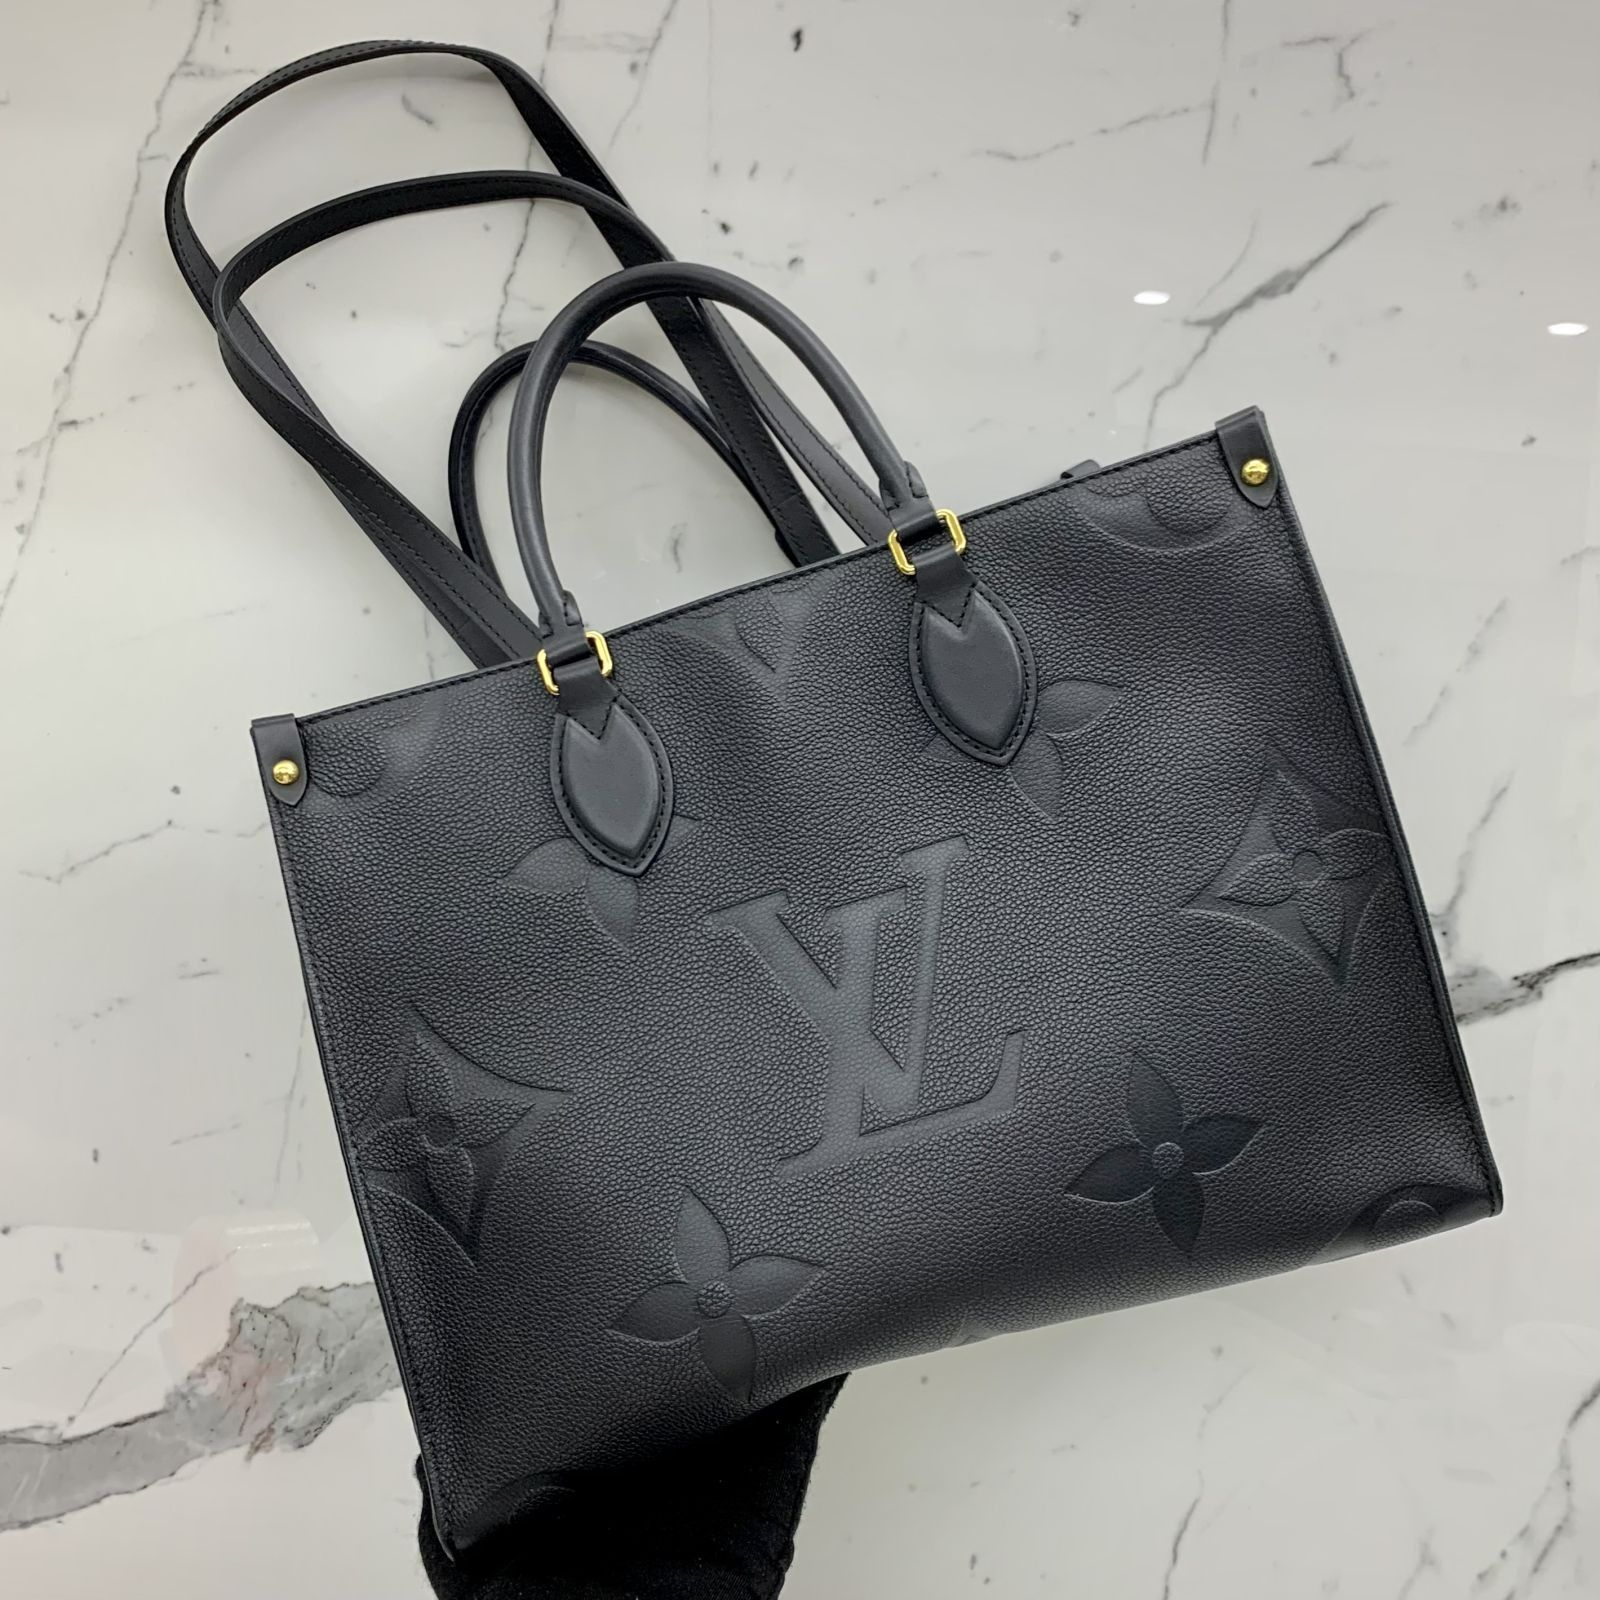 Louis Vuitton Neverfull MM with Pouch, Empreinte Leather Khaki and Beige,  New in Dustbag - Julia Rose Boston